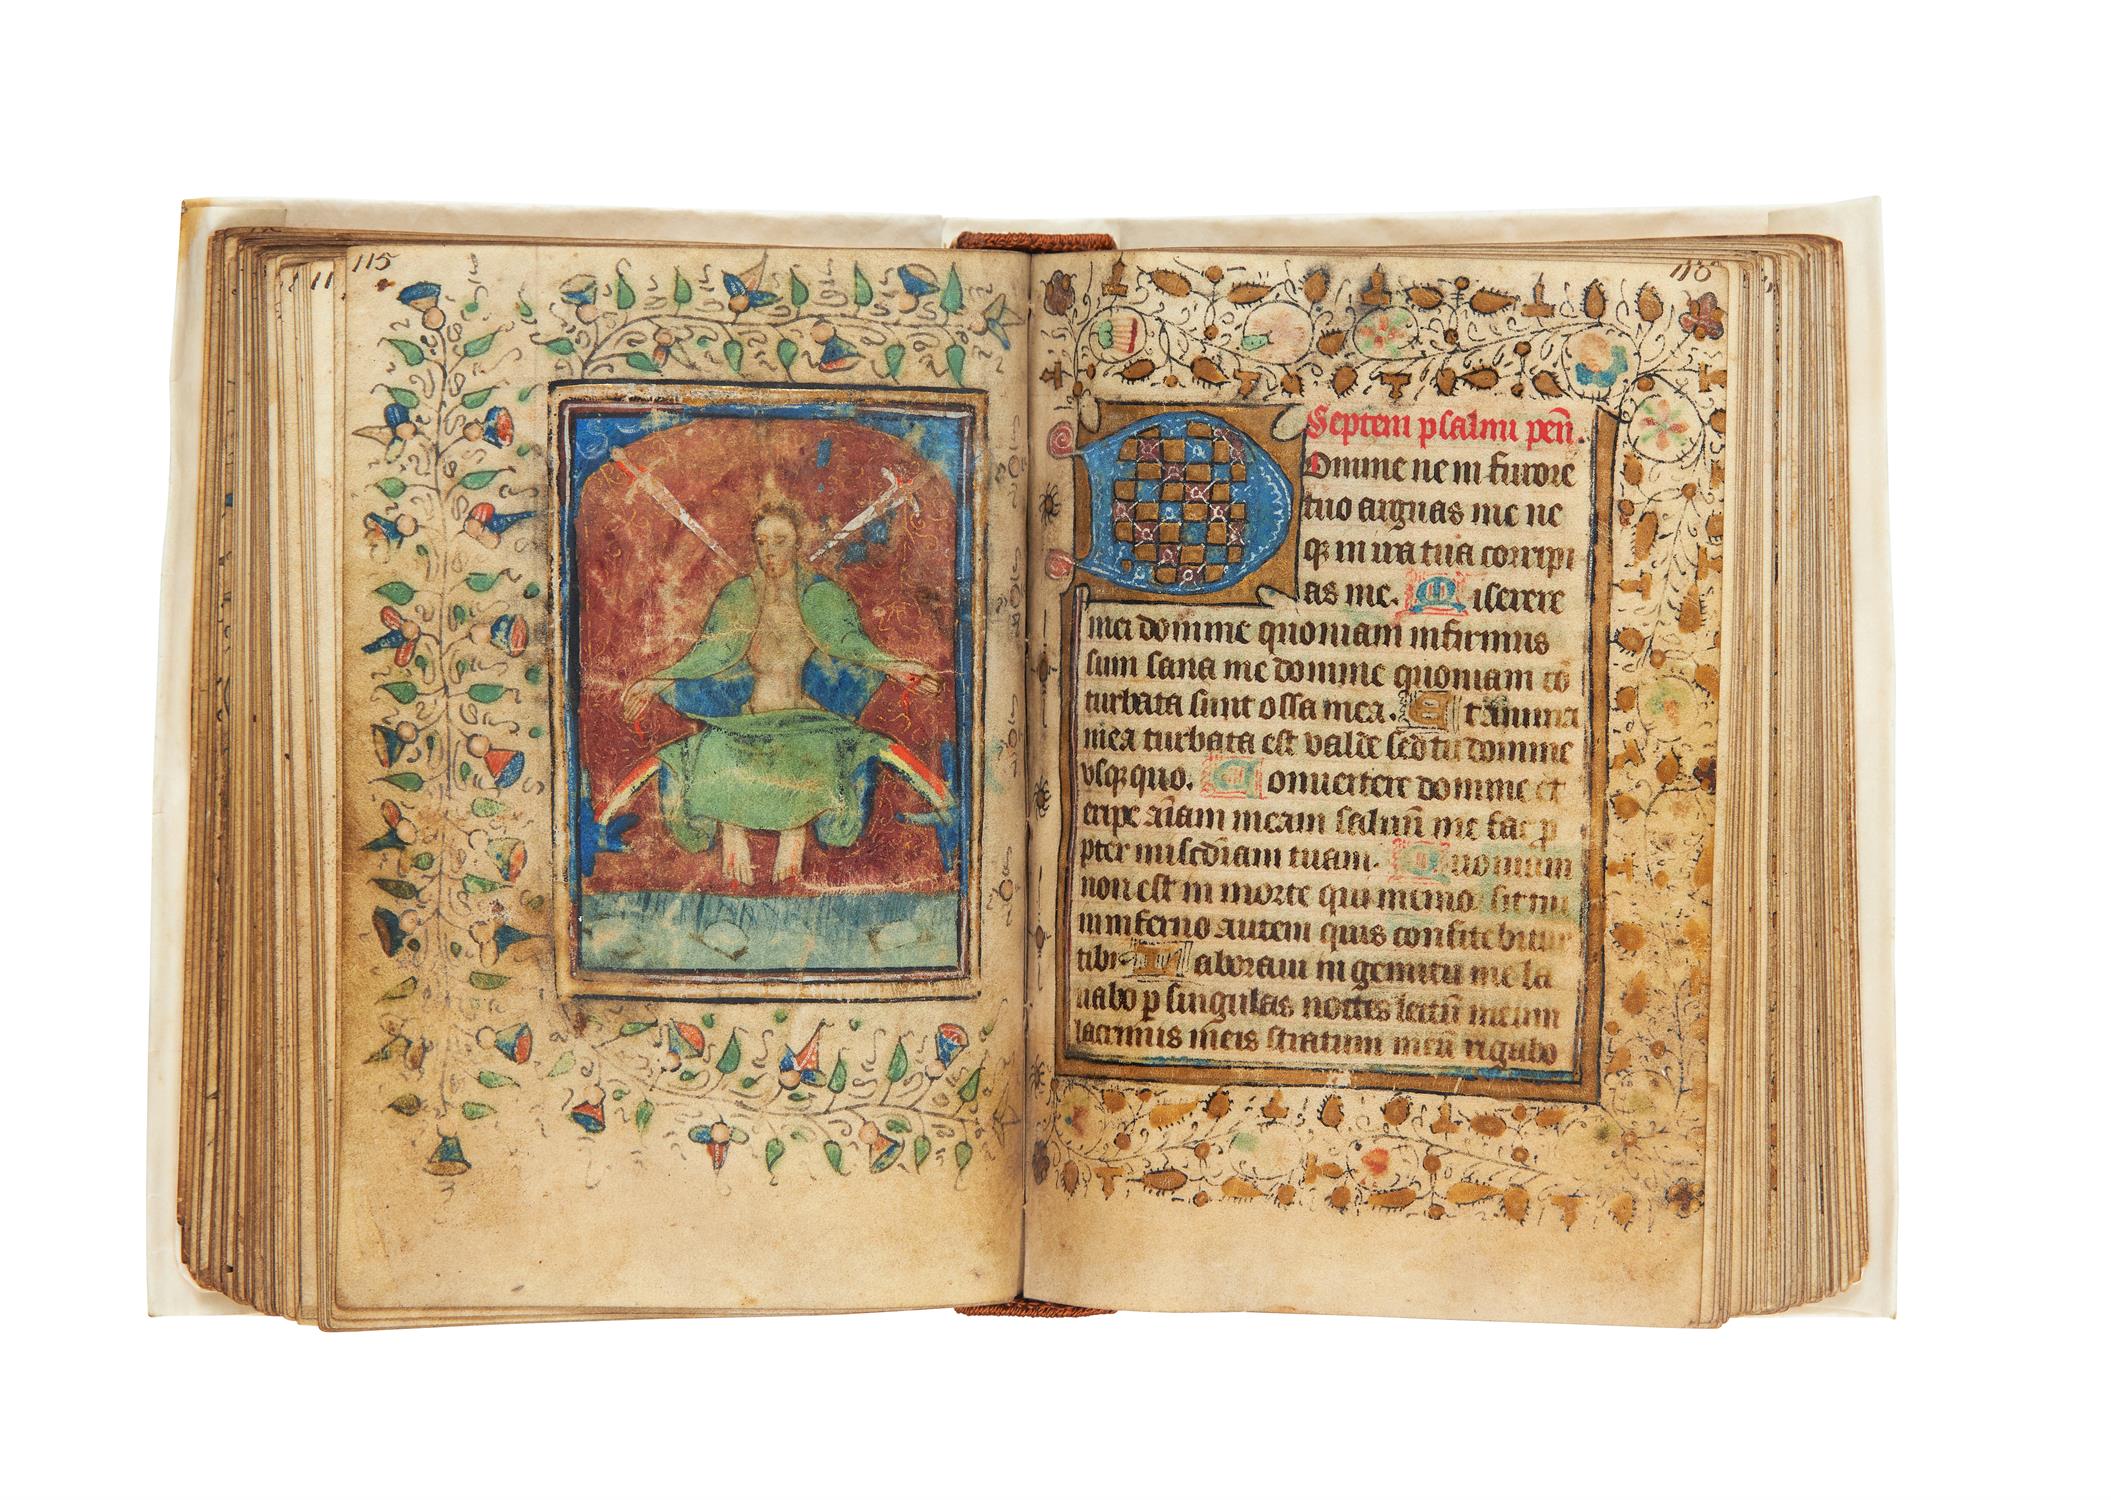 Ɵ Book of Hours, Use of Sarum, in Latin with Middle English inscription, illuminated manuscript - Image 5 of 5